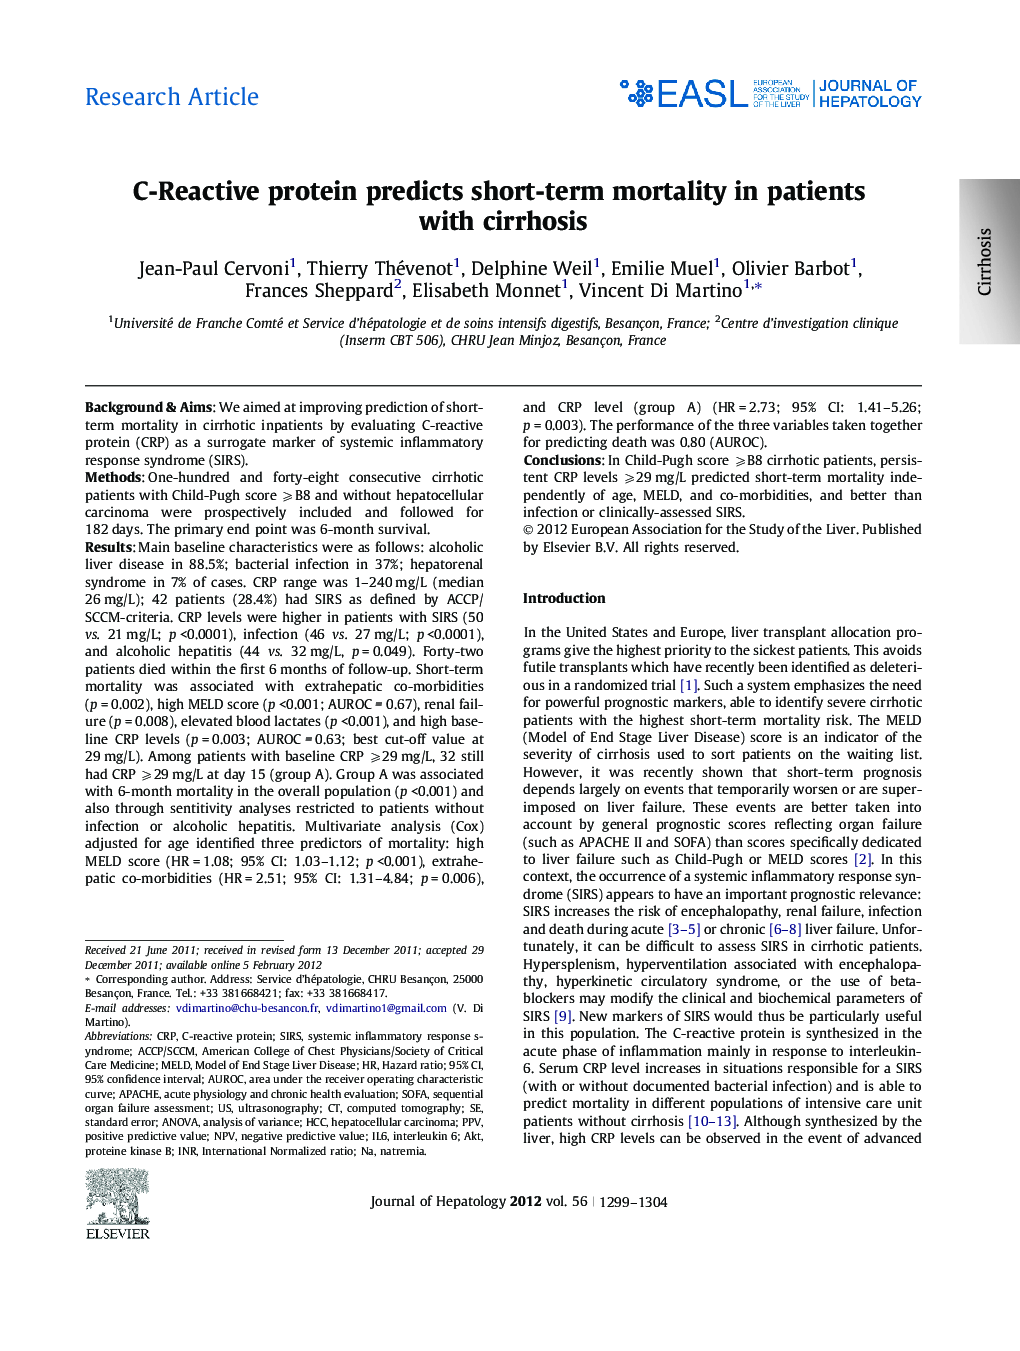 Research ArticleC-Reactive protein predicts short-term mortality in patients with cirrhosis